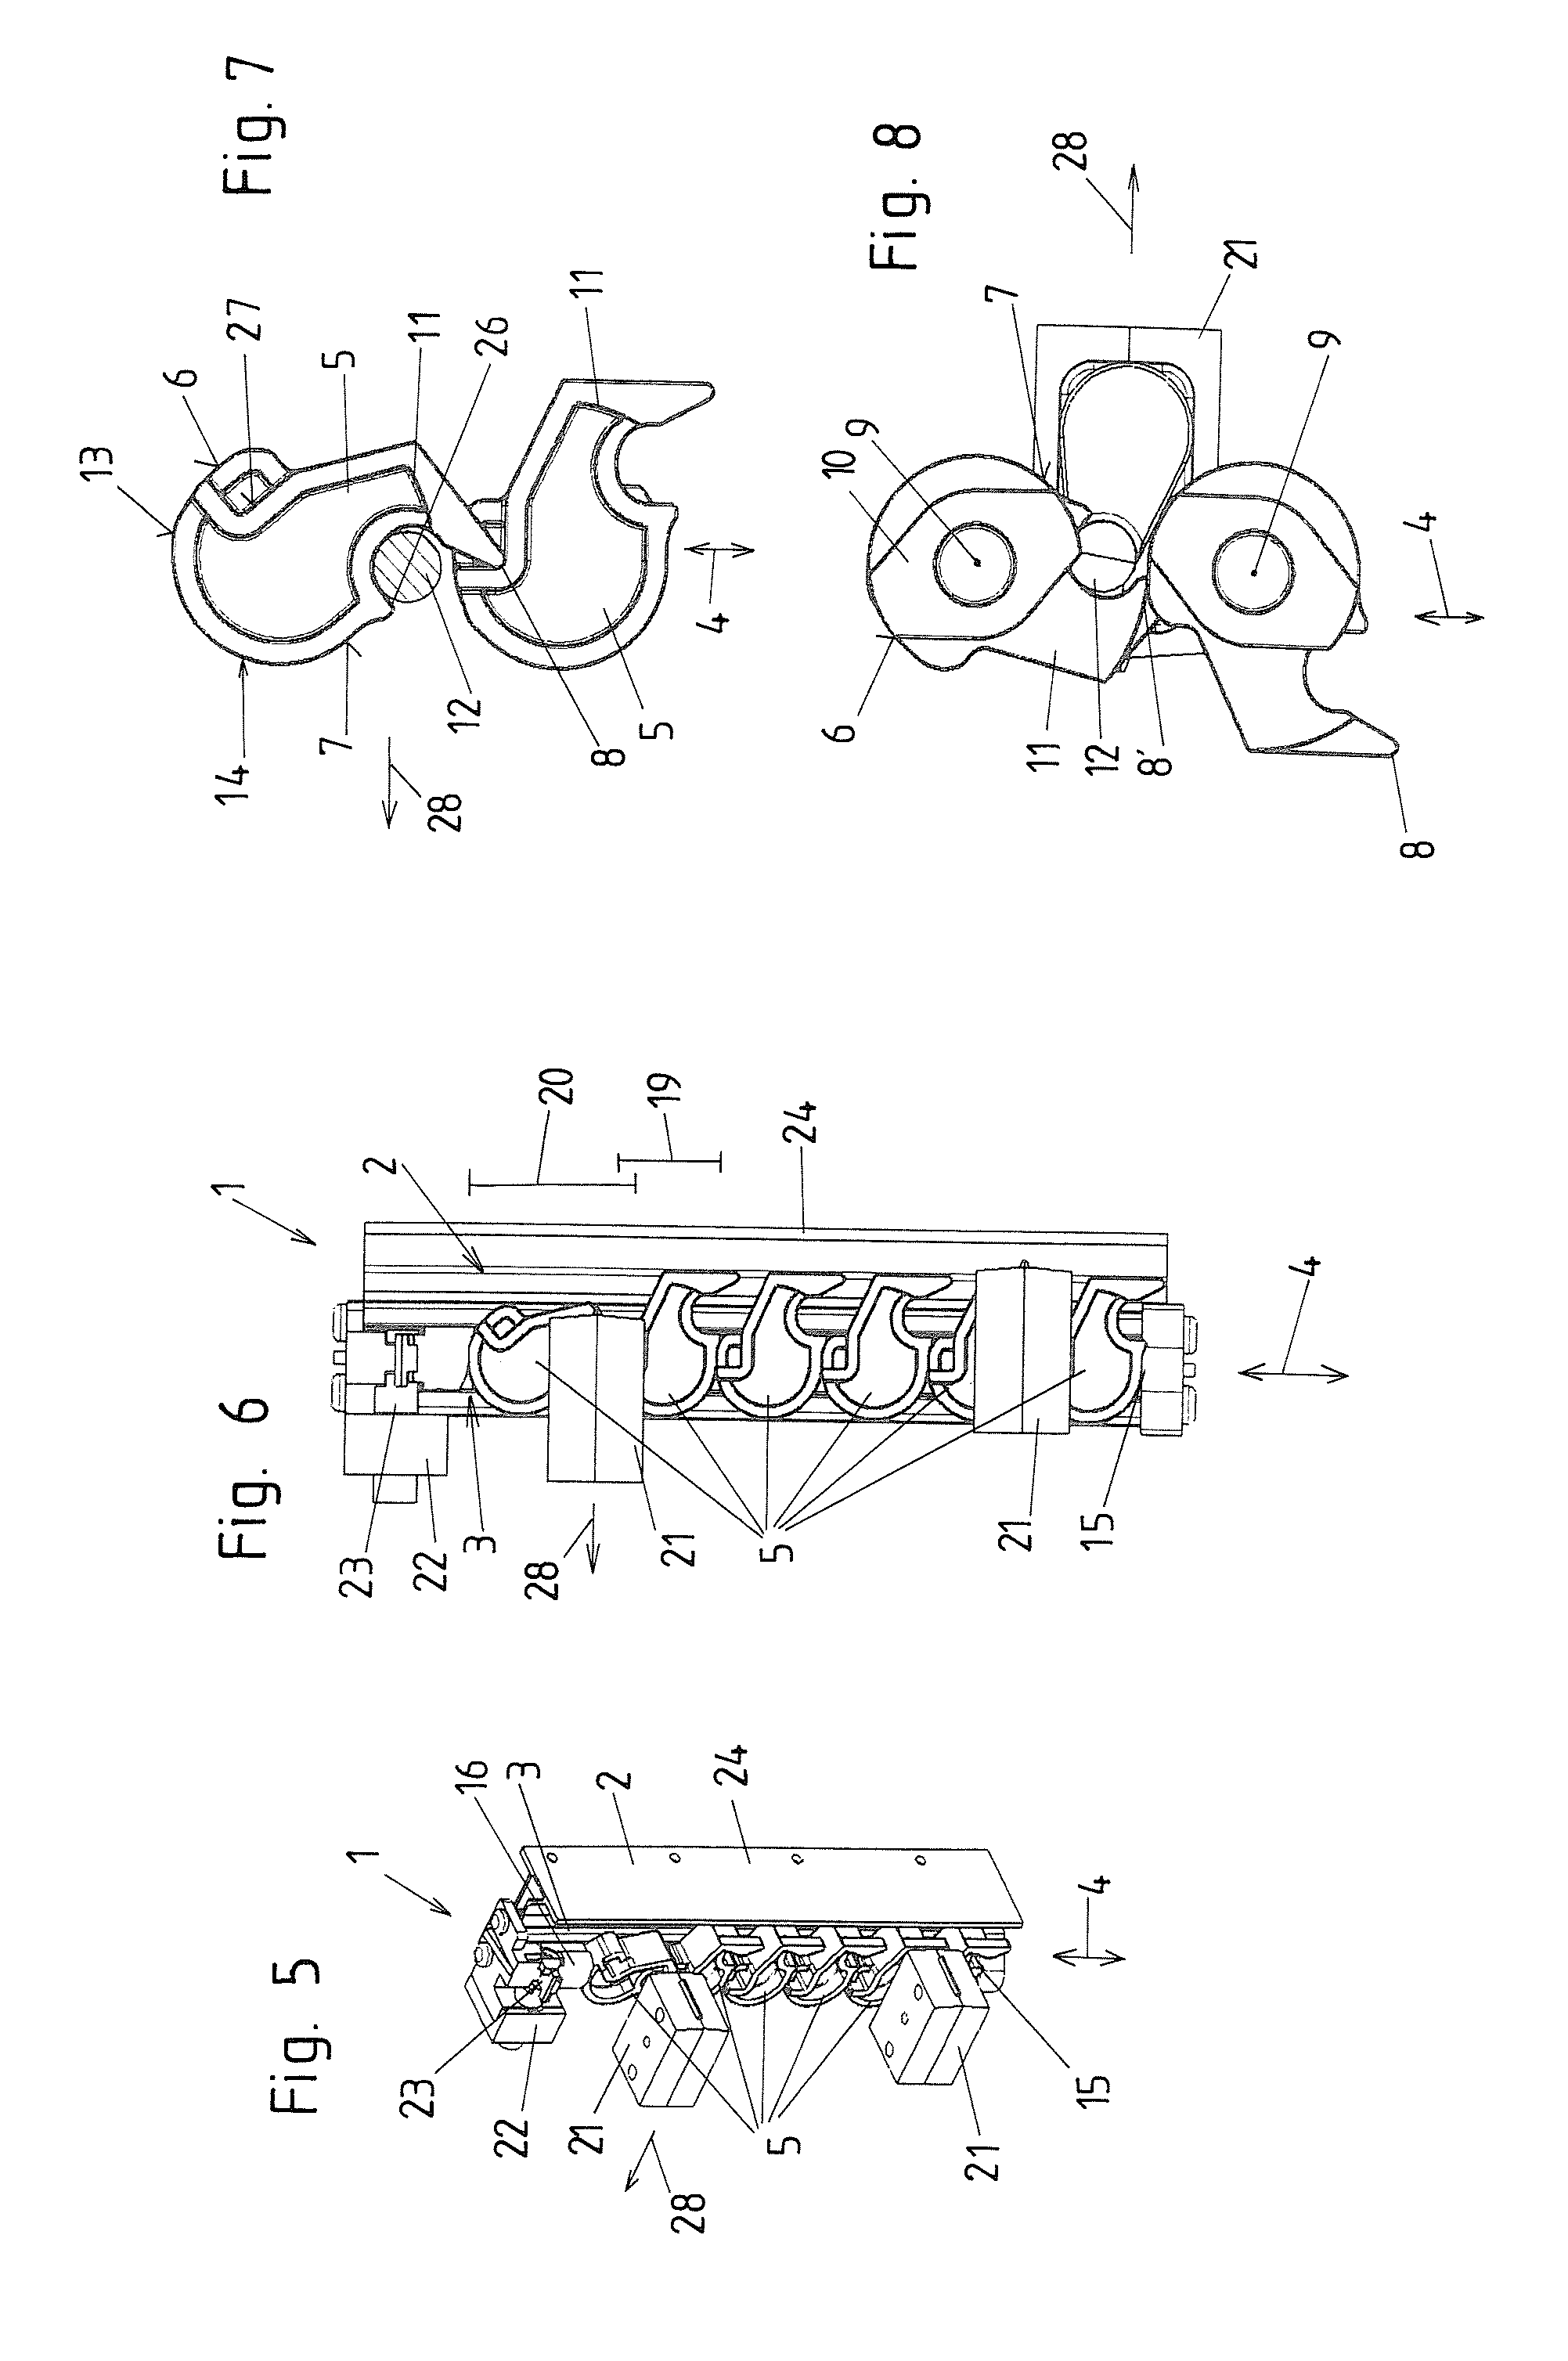 Pull-out blocking device